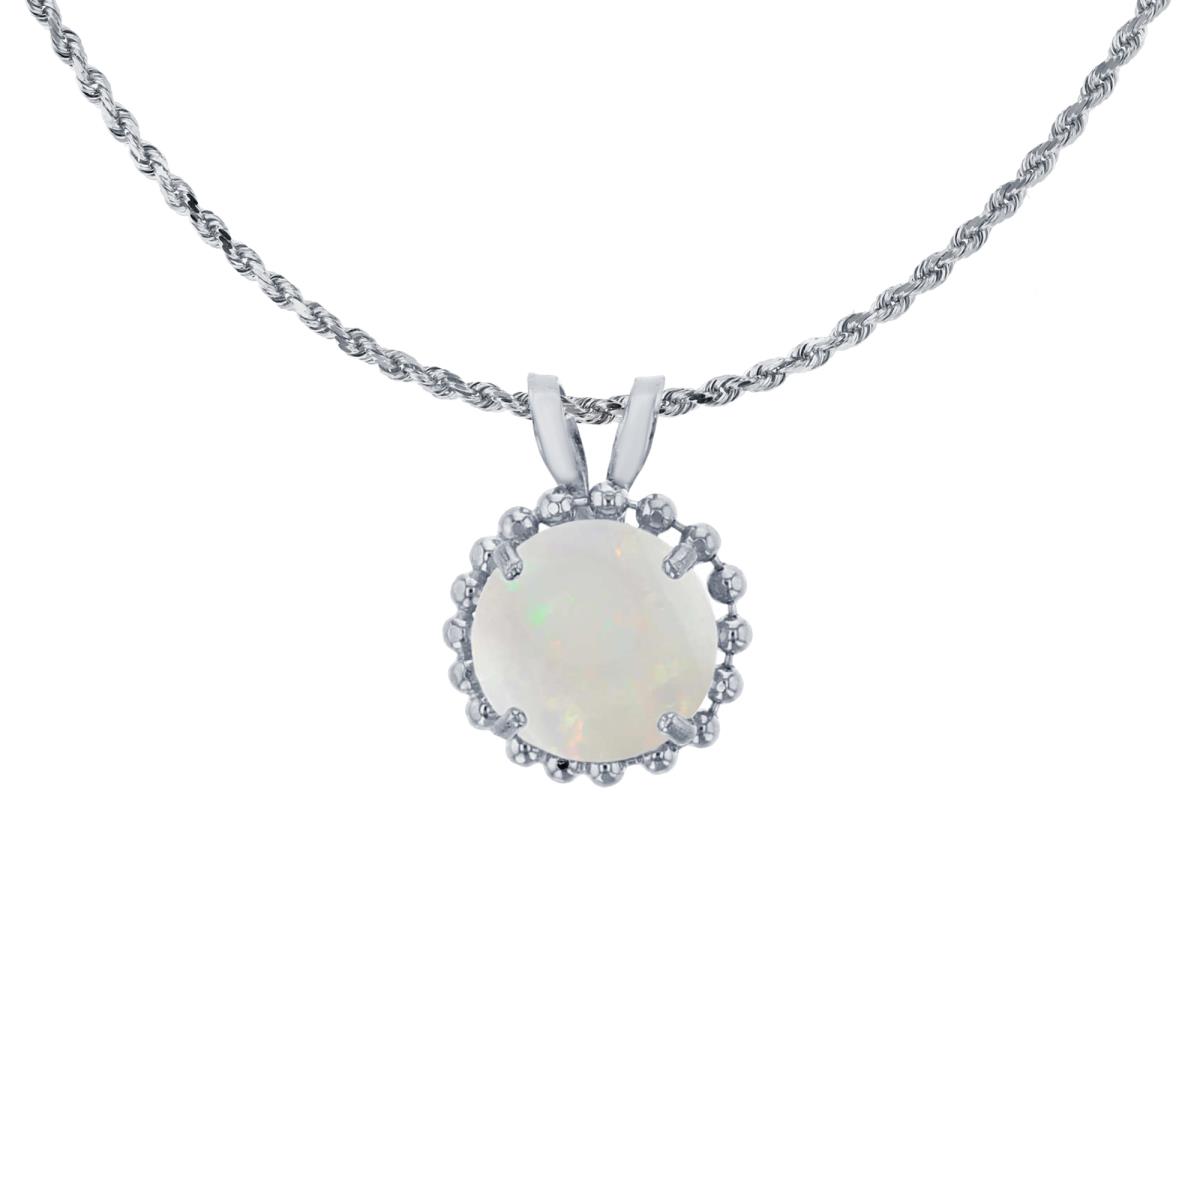 10K White Gold 6mm Rd Cut Opal with Bead Frame Rabbit Ear 18" Necklace